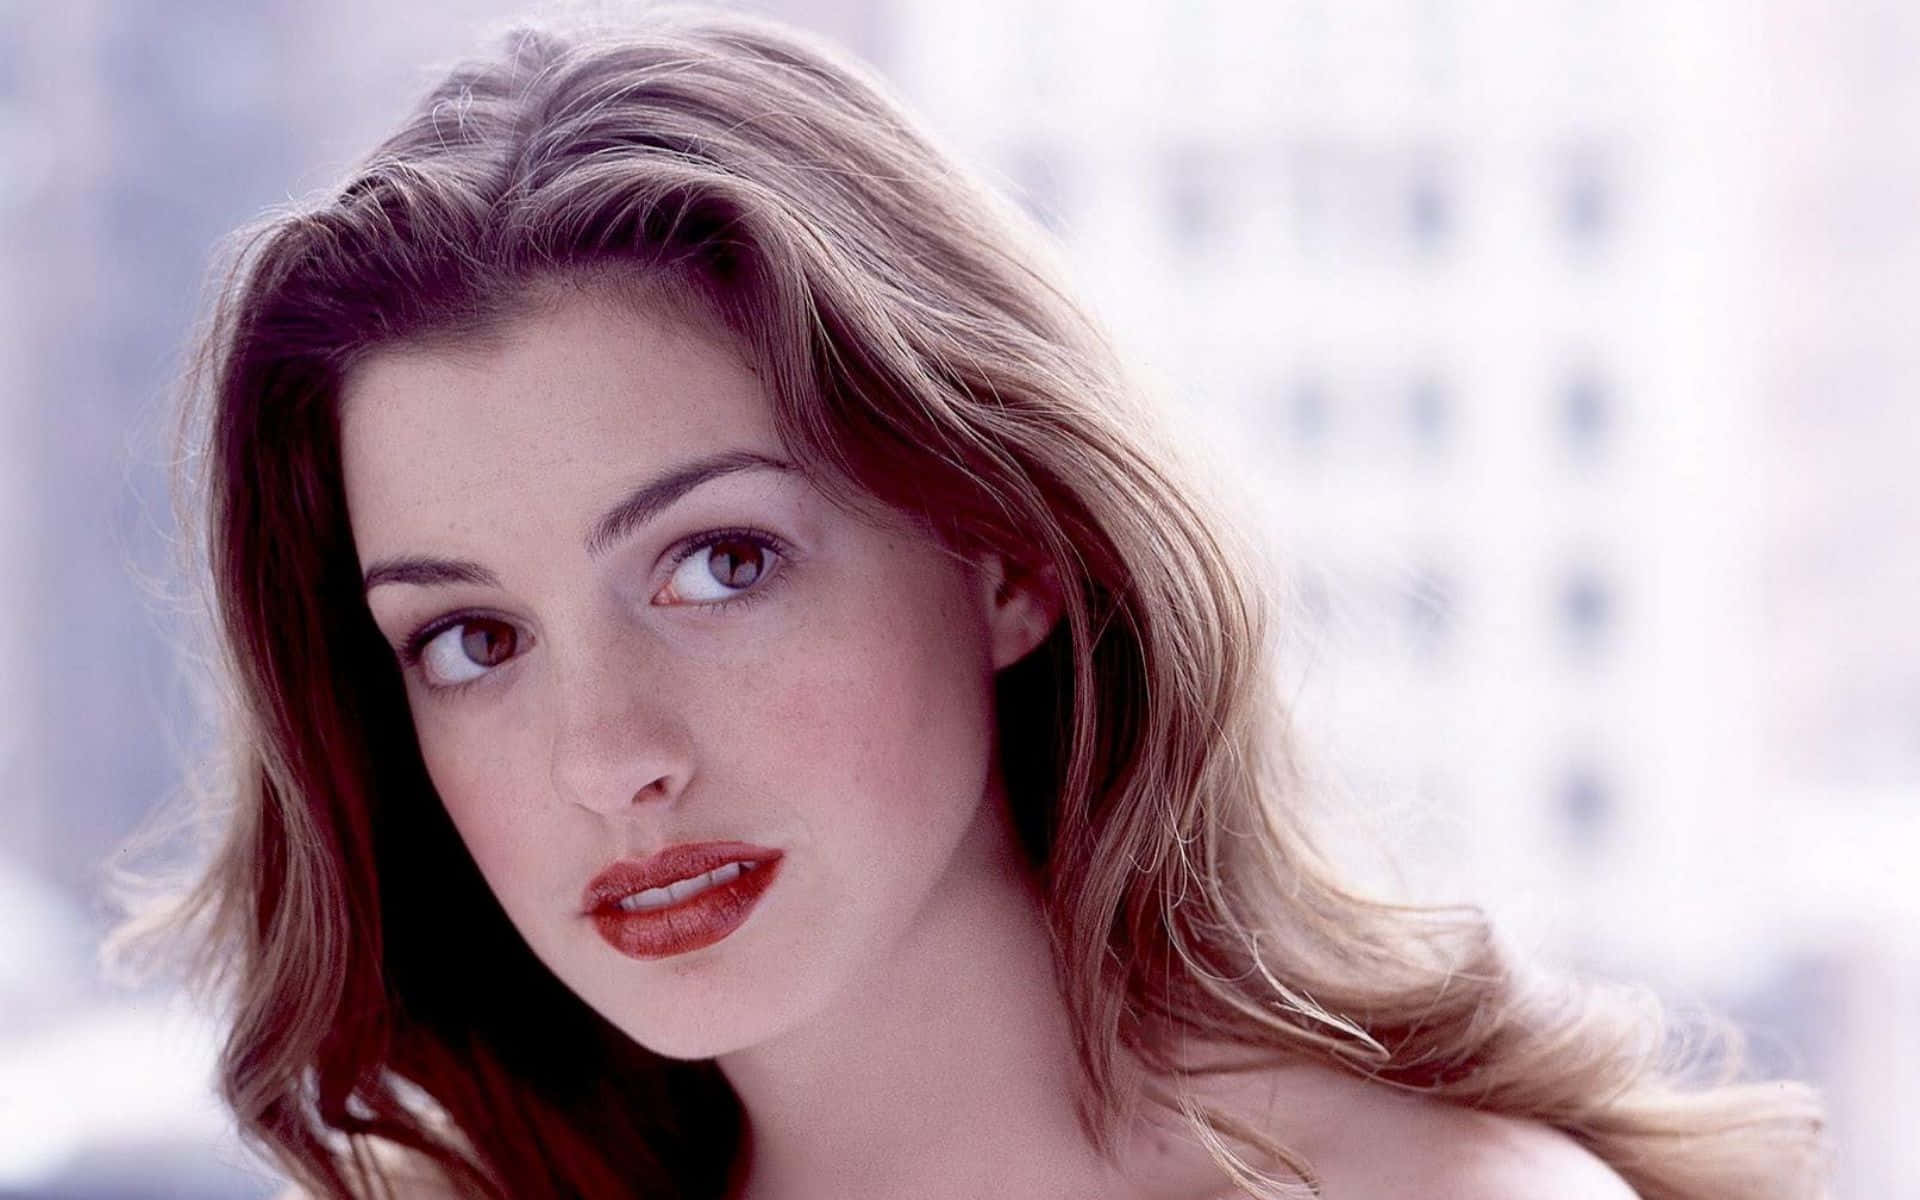 Anne Hathaway Looking Radiant and Refreshing